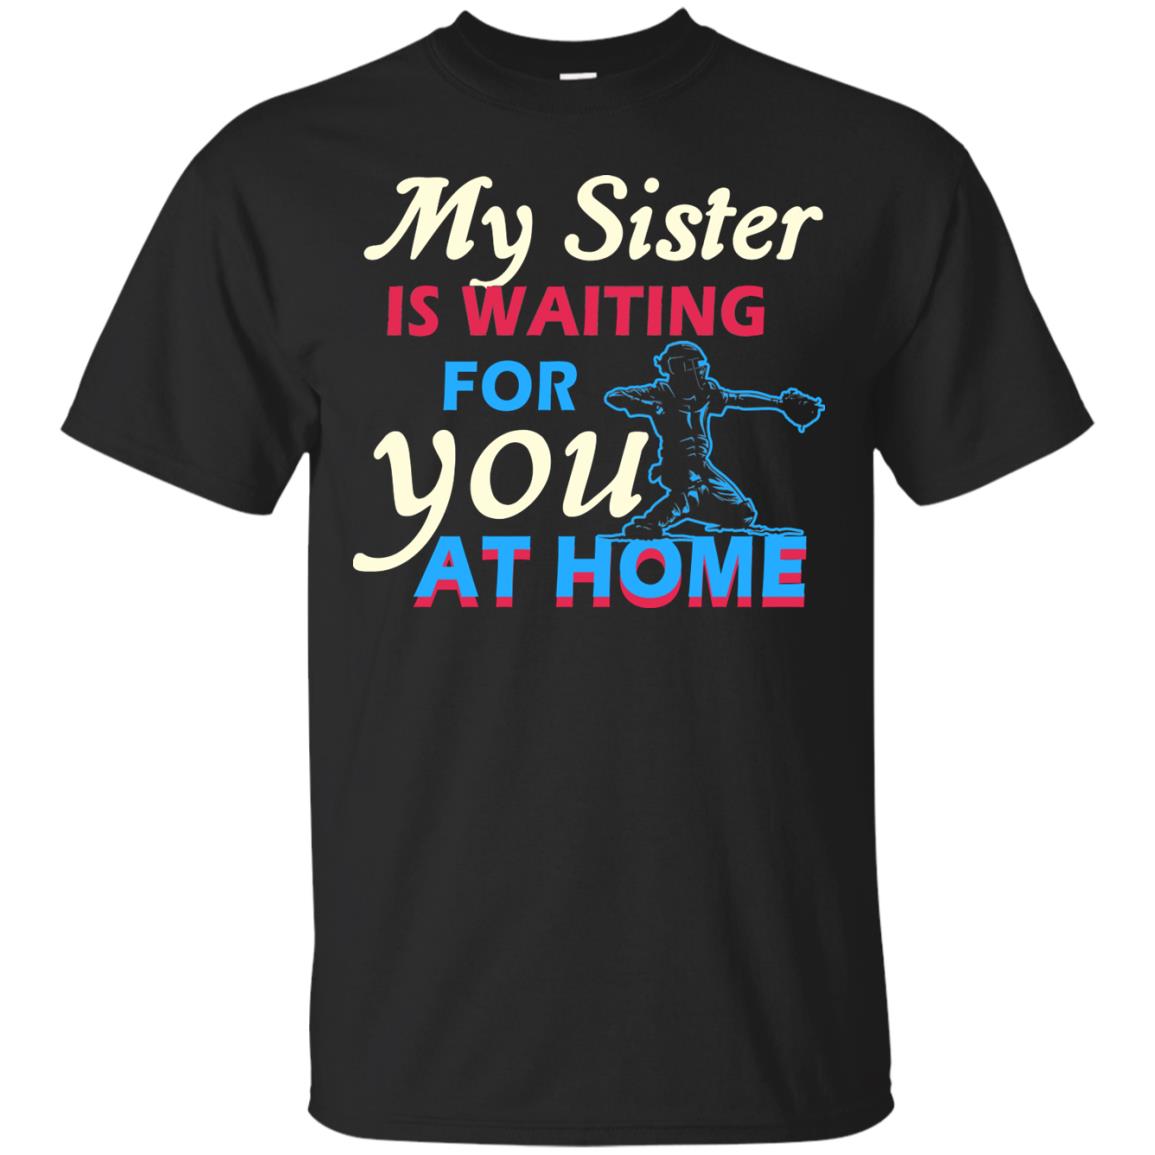 My Sister Is Waiting For You At Home Funny Family Gift Shirt For Baseball Lover